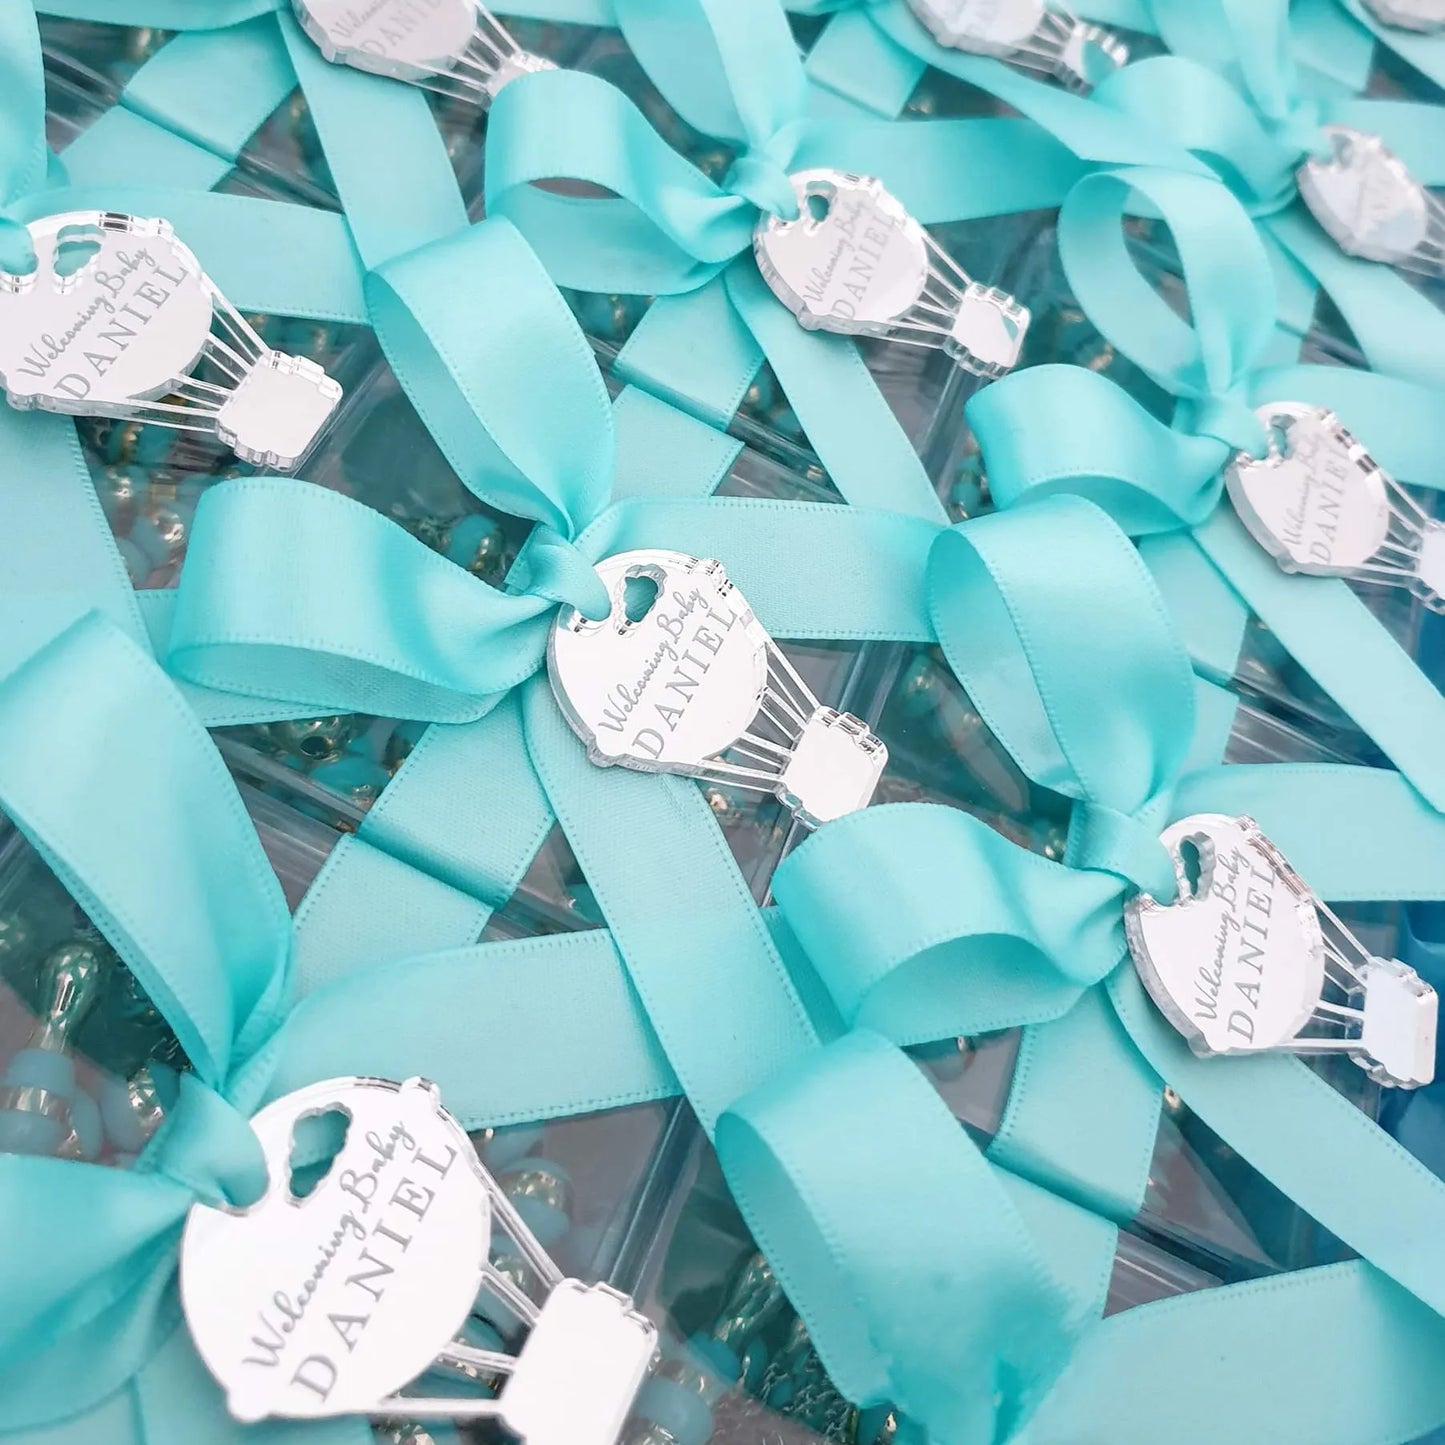 50 Pcs Custom Balloon Tags: Engraved Baby Name, Shower, Birthday, Chocolate Plaque Favors.